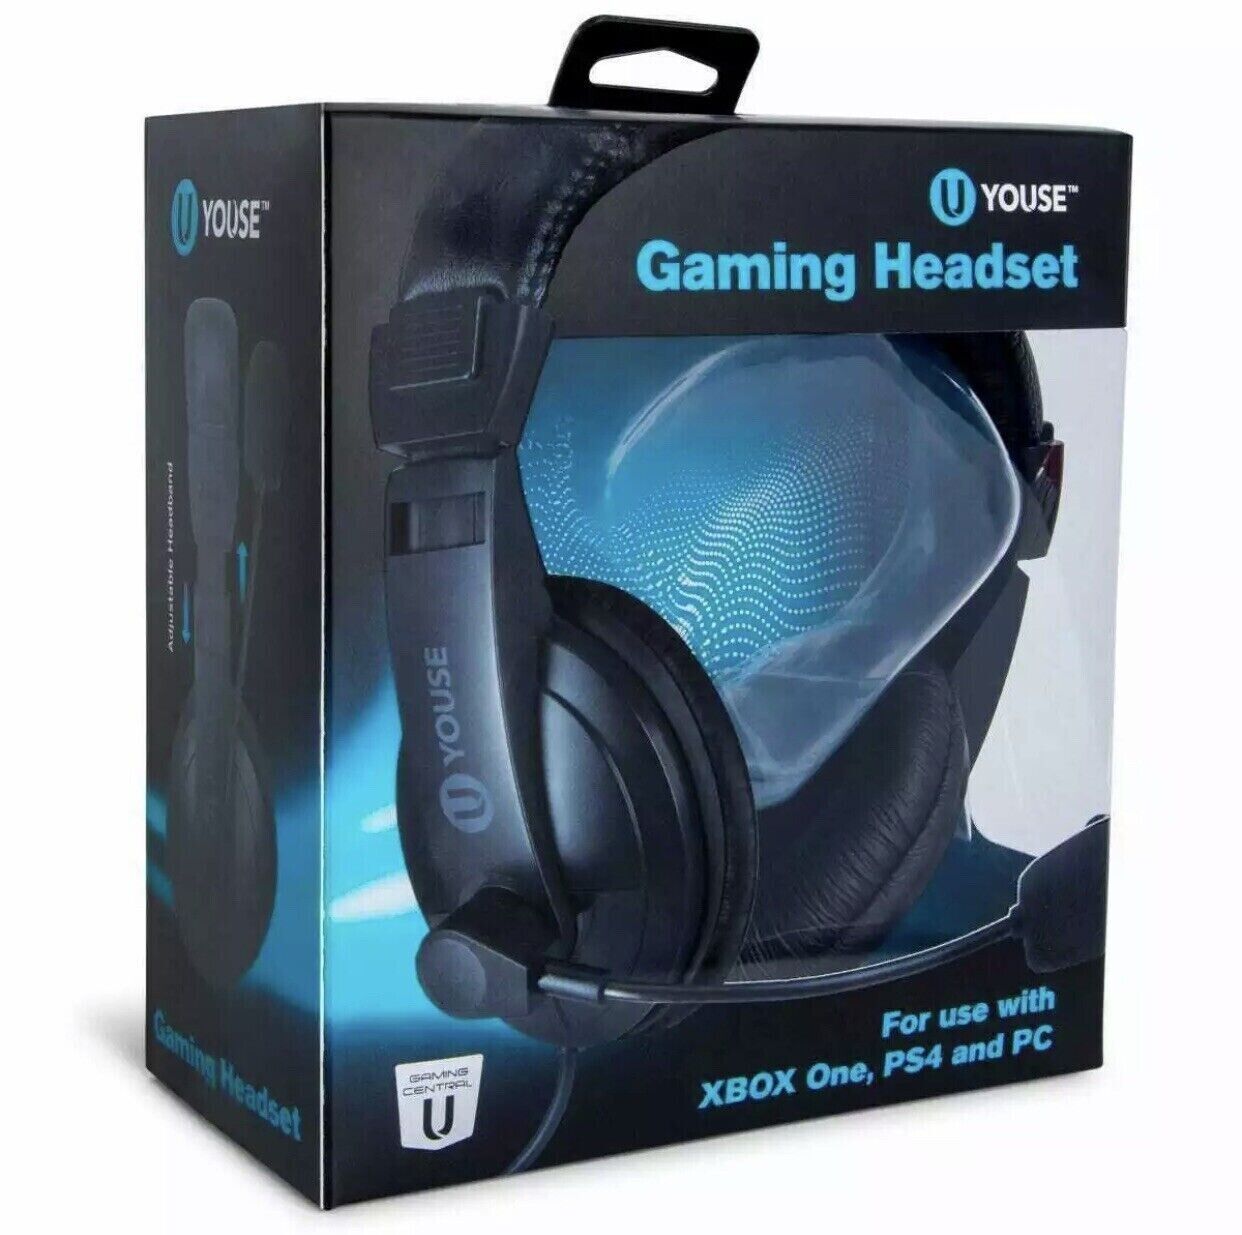 U Youse Gaming Headset Xbox One, PS4, And PC, With Built In Mic - Headphones New